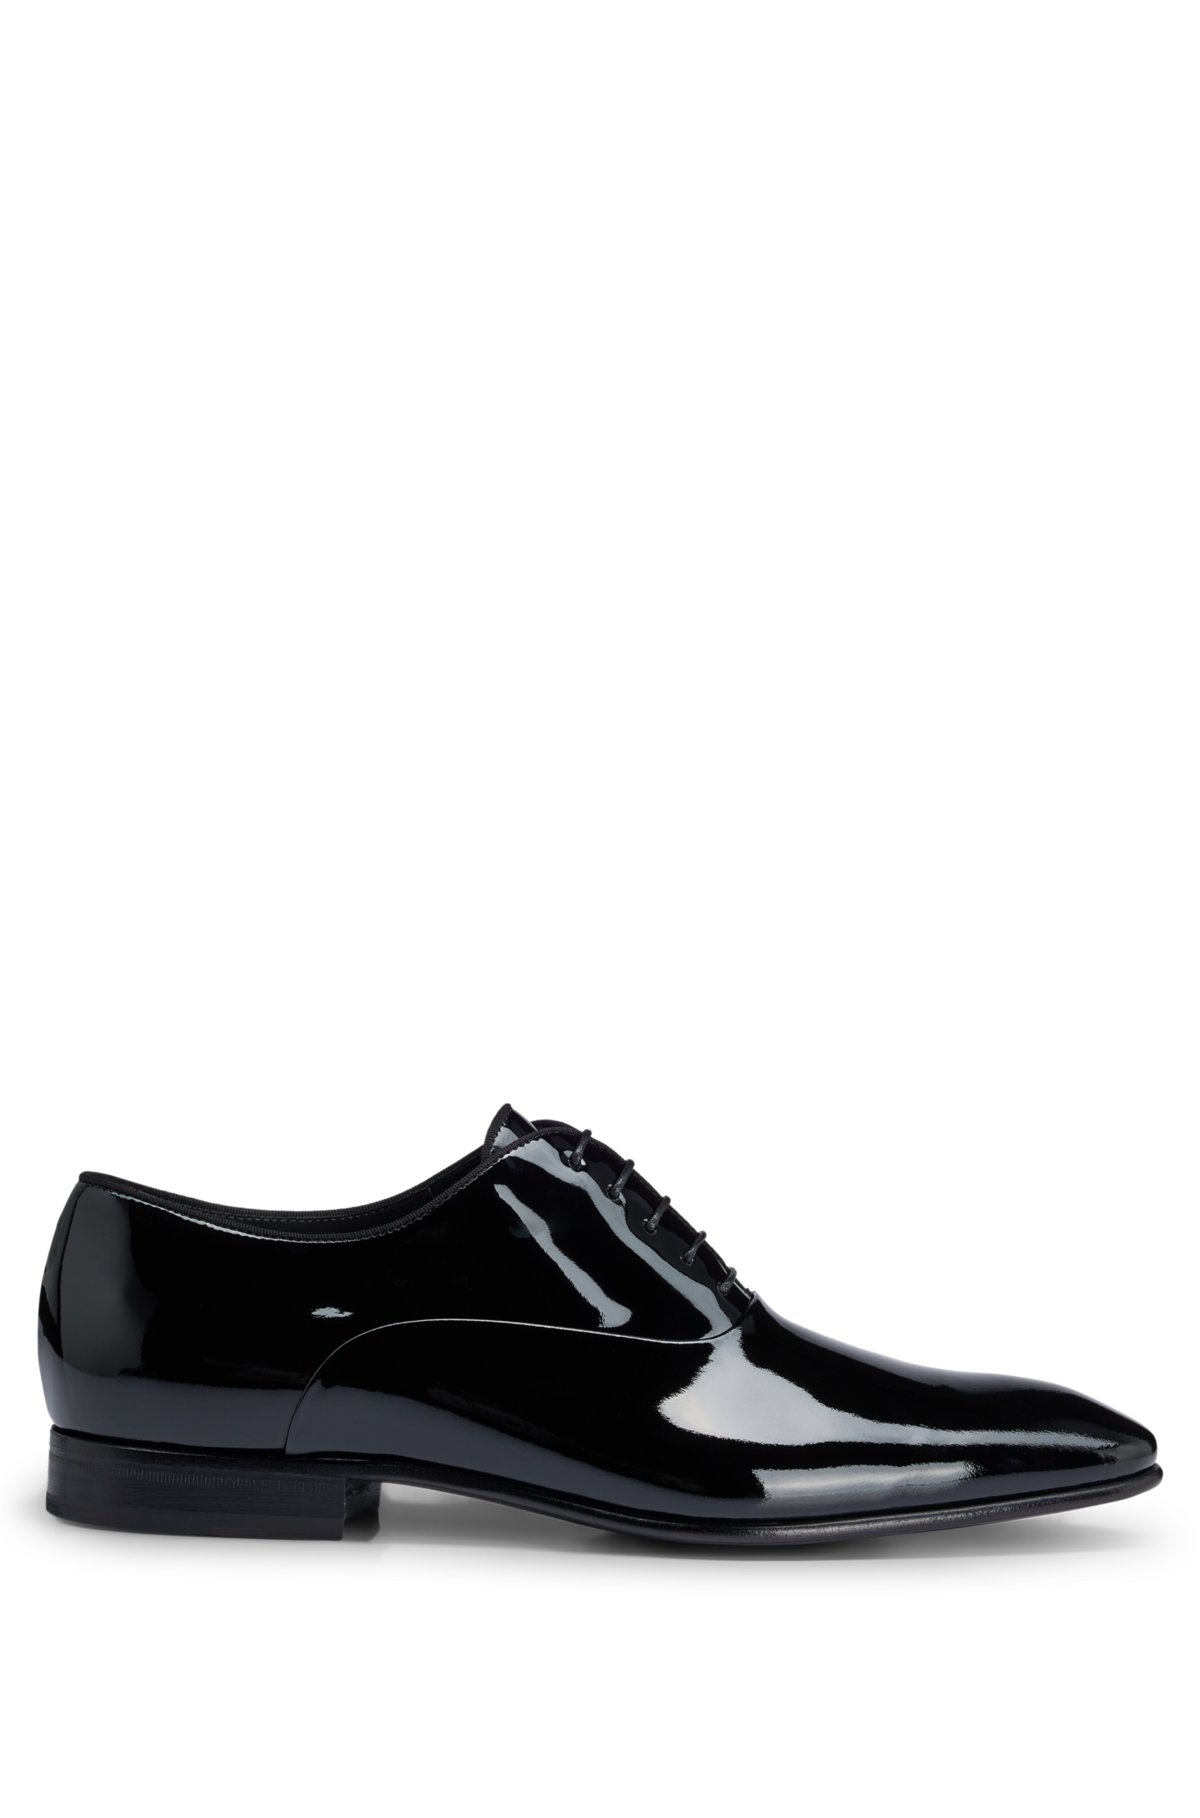 Leather Oxford shoes with leather lining, Black